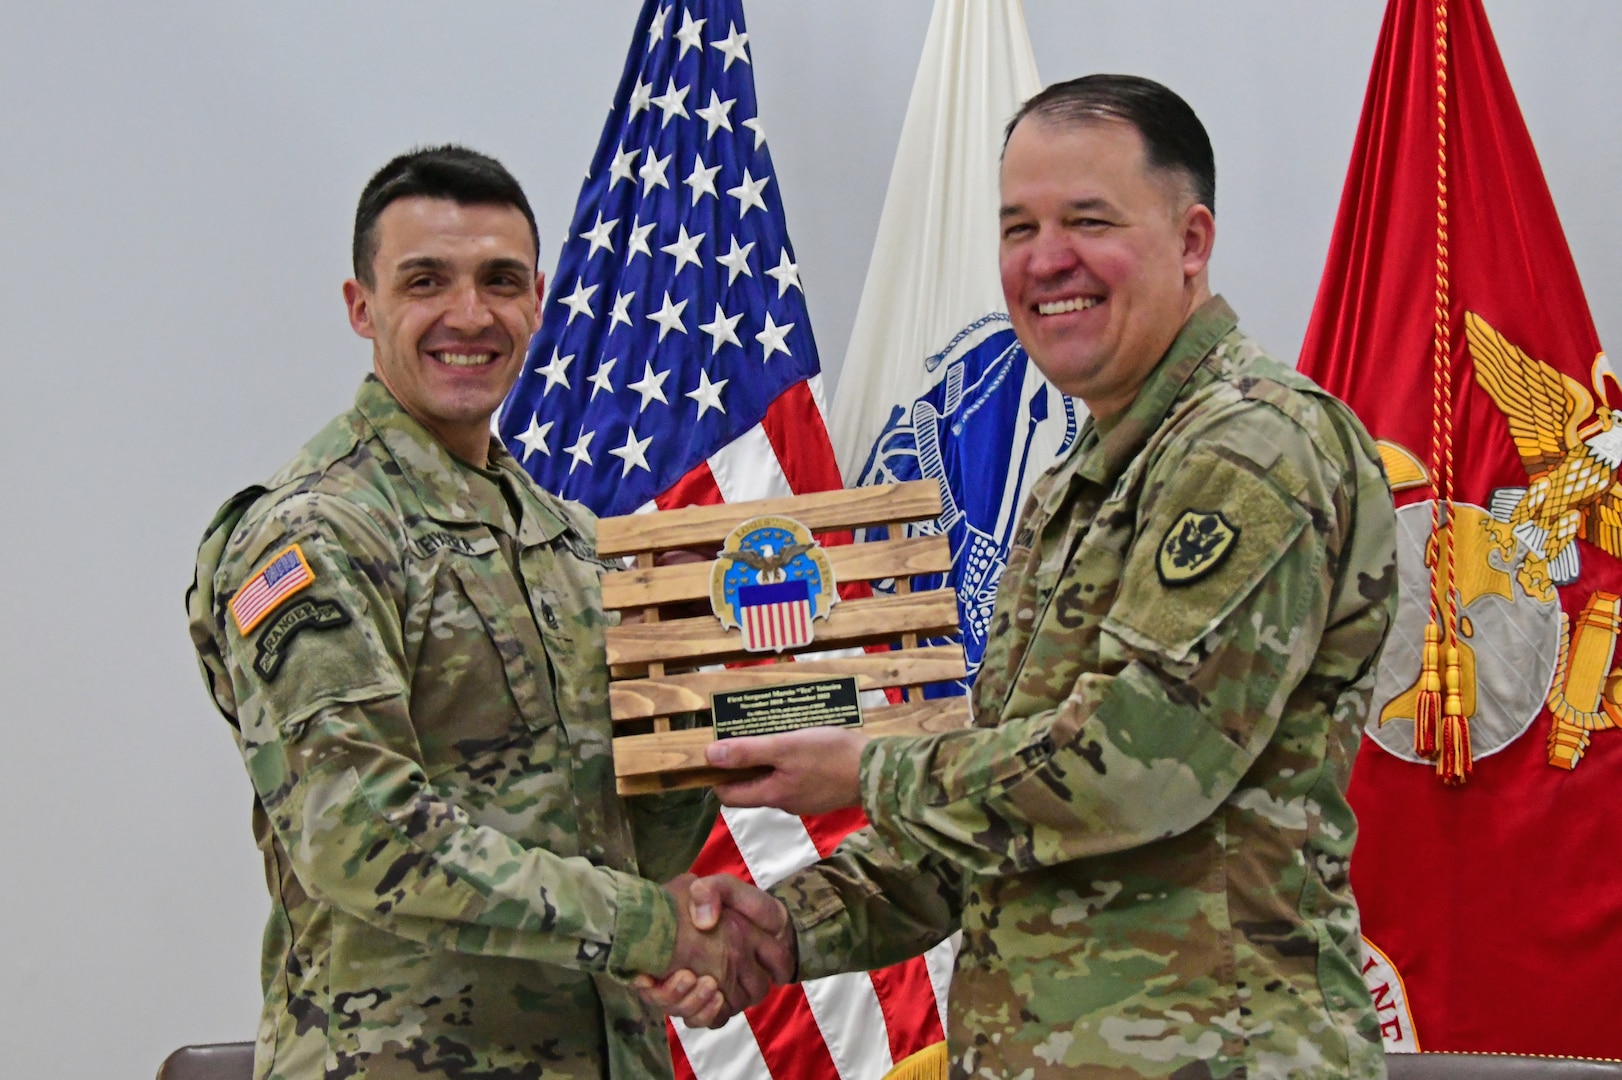 Two men in uniform exchange an award honoring one of them for their service. The award is shaped as a pallet.